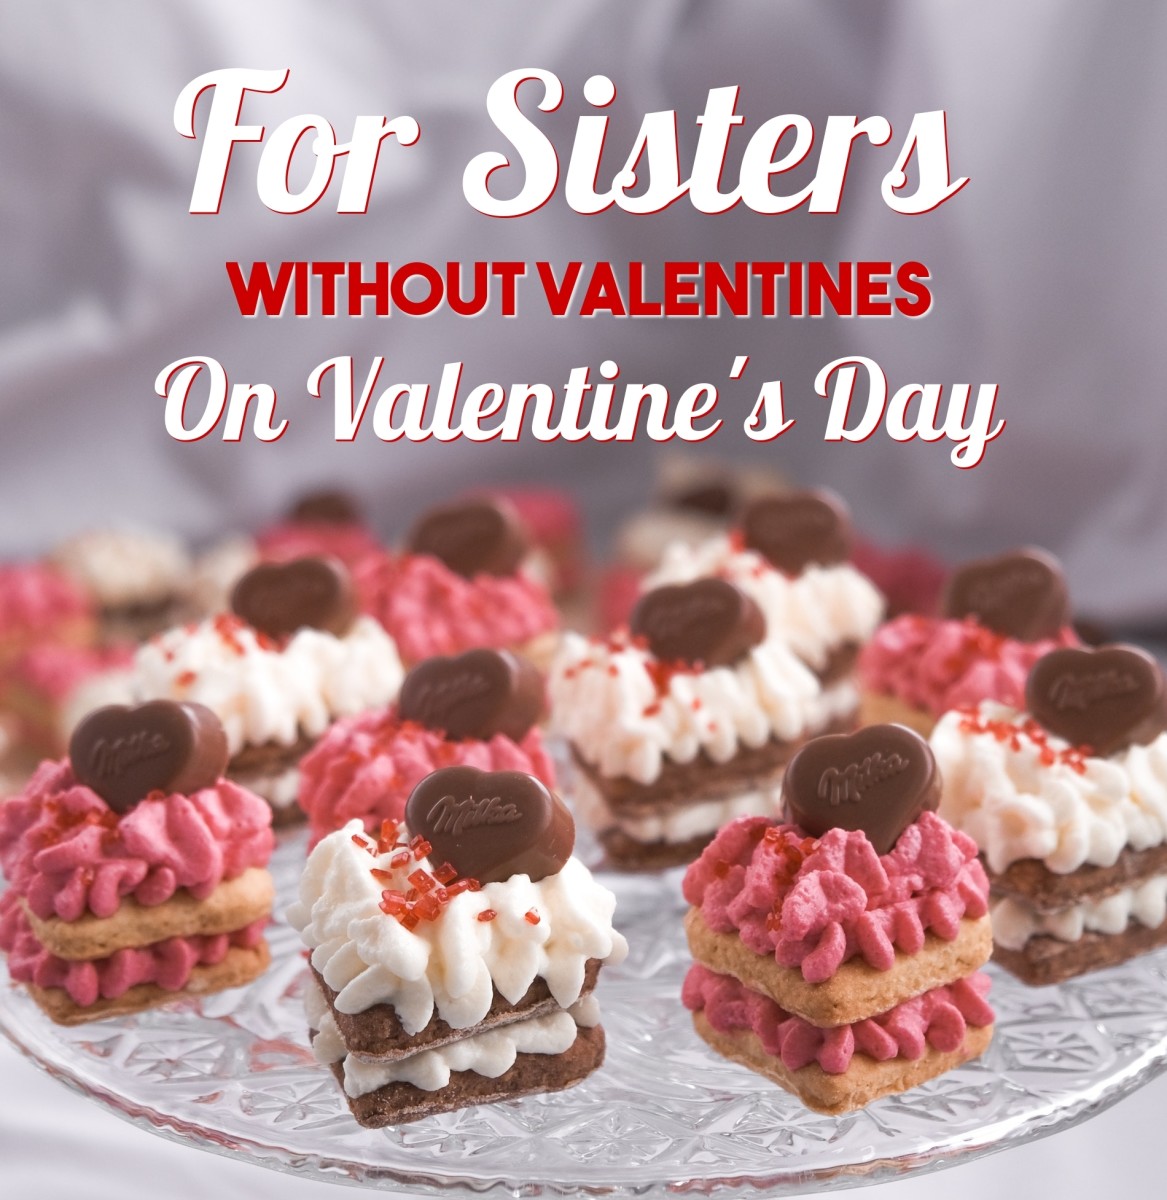 For Sisters Without Valentines on Valentine's Day